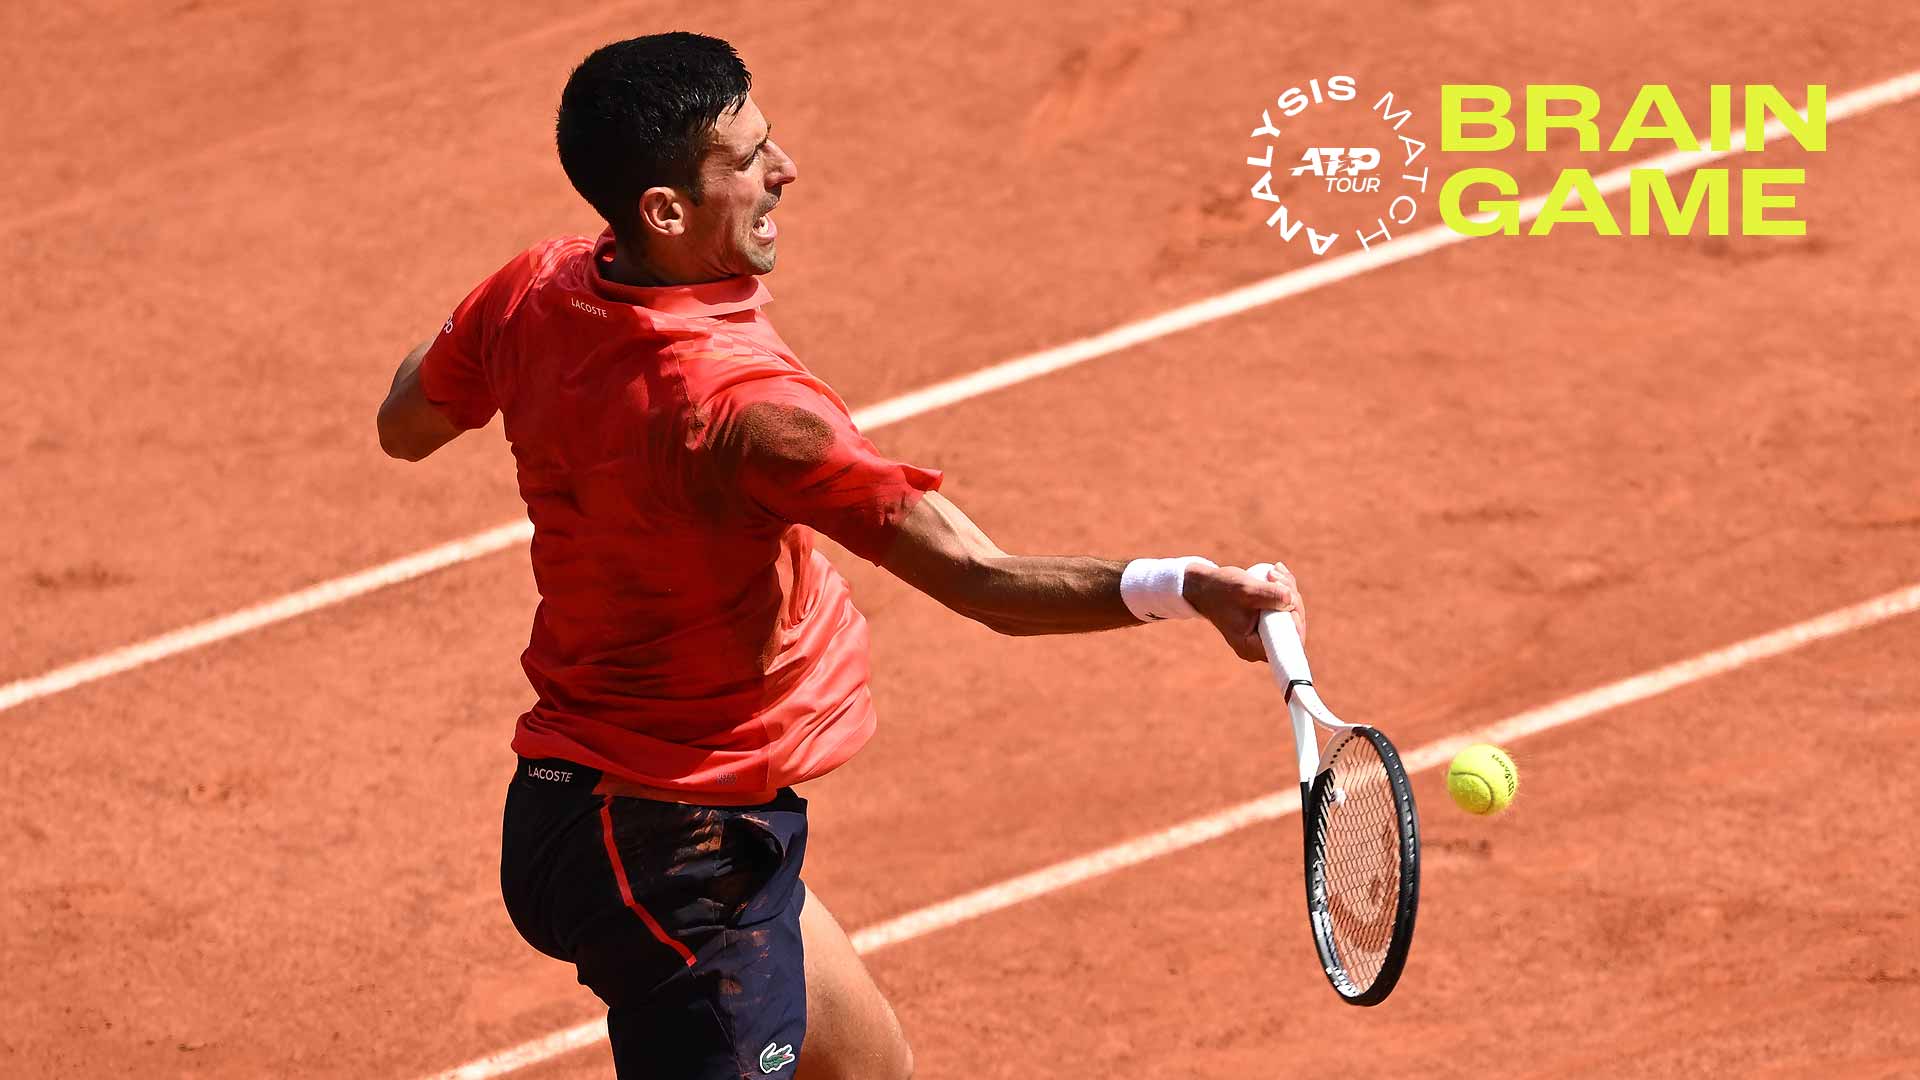 Novak Djokovic defeats Casper Ruud in straight sets to win the Roland Garros title for the third time.